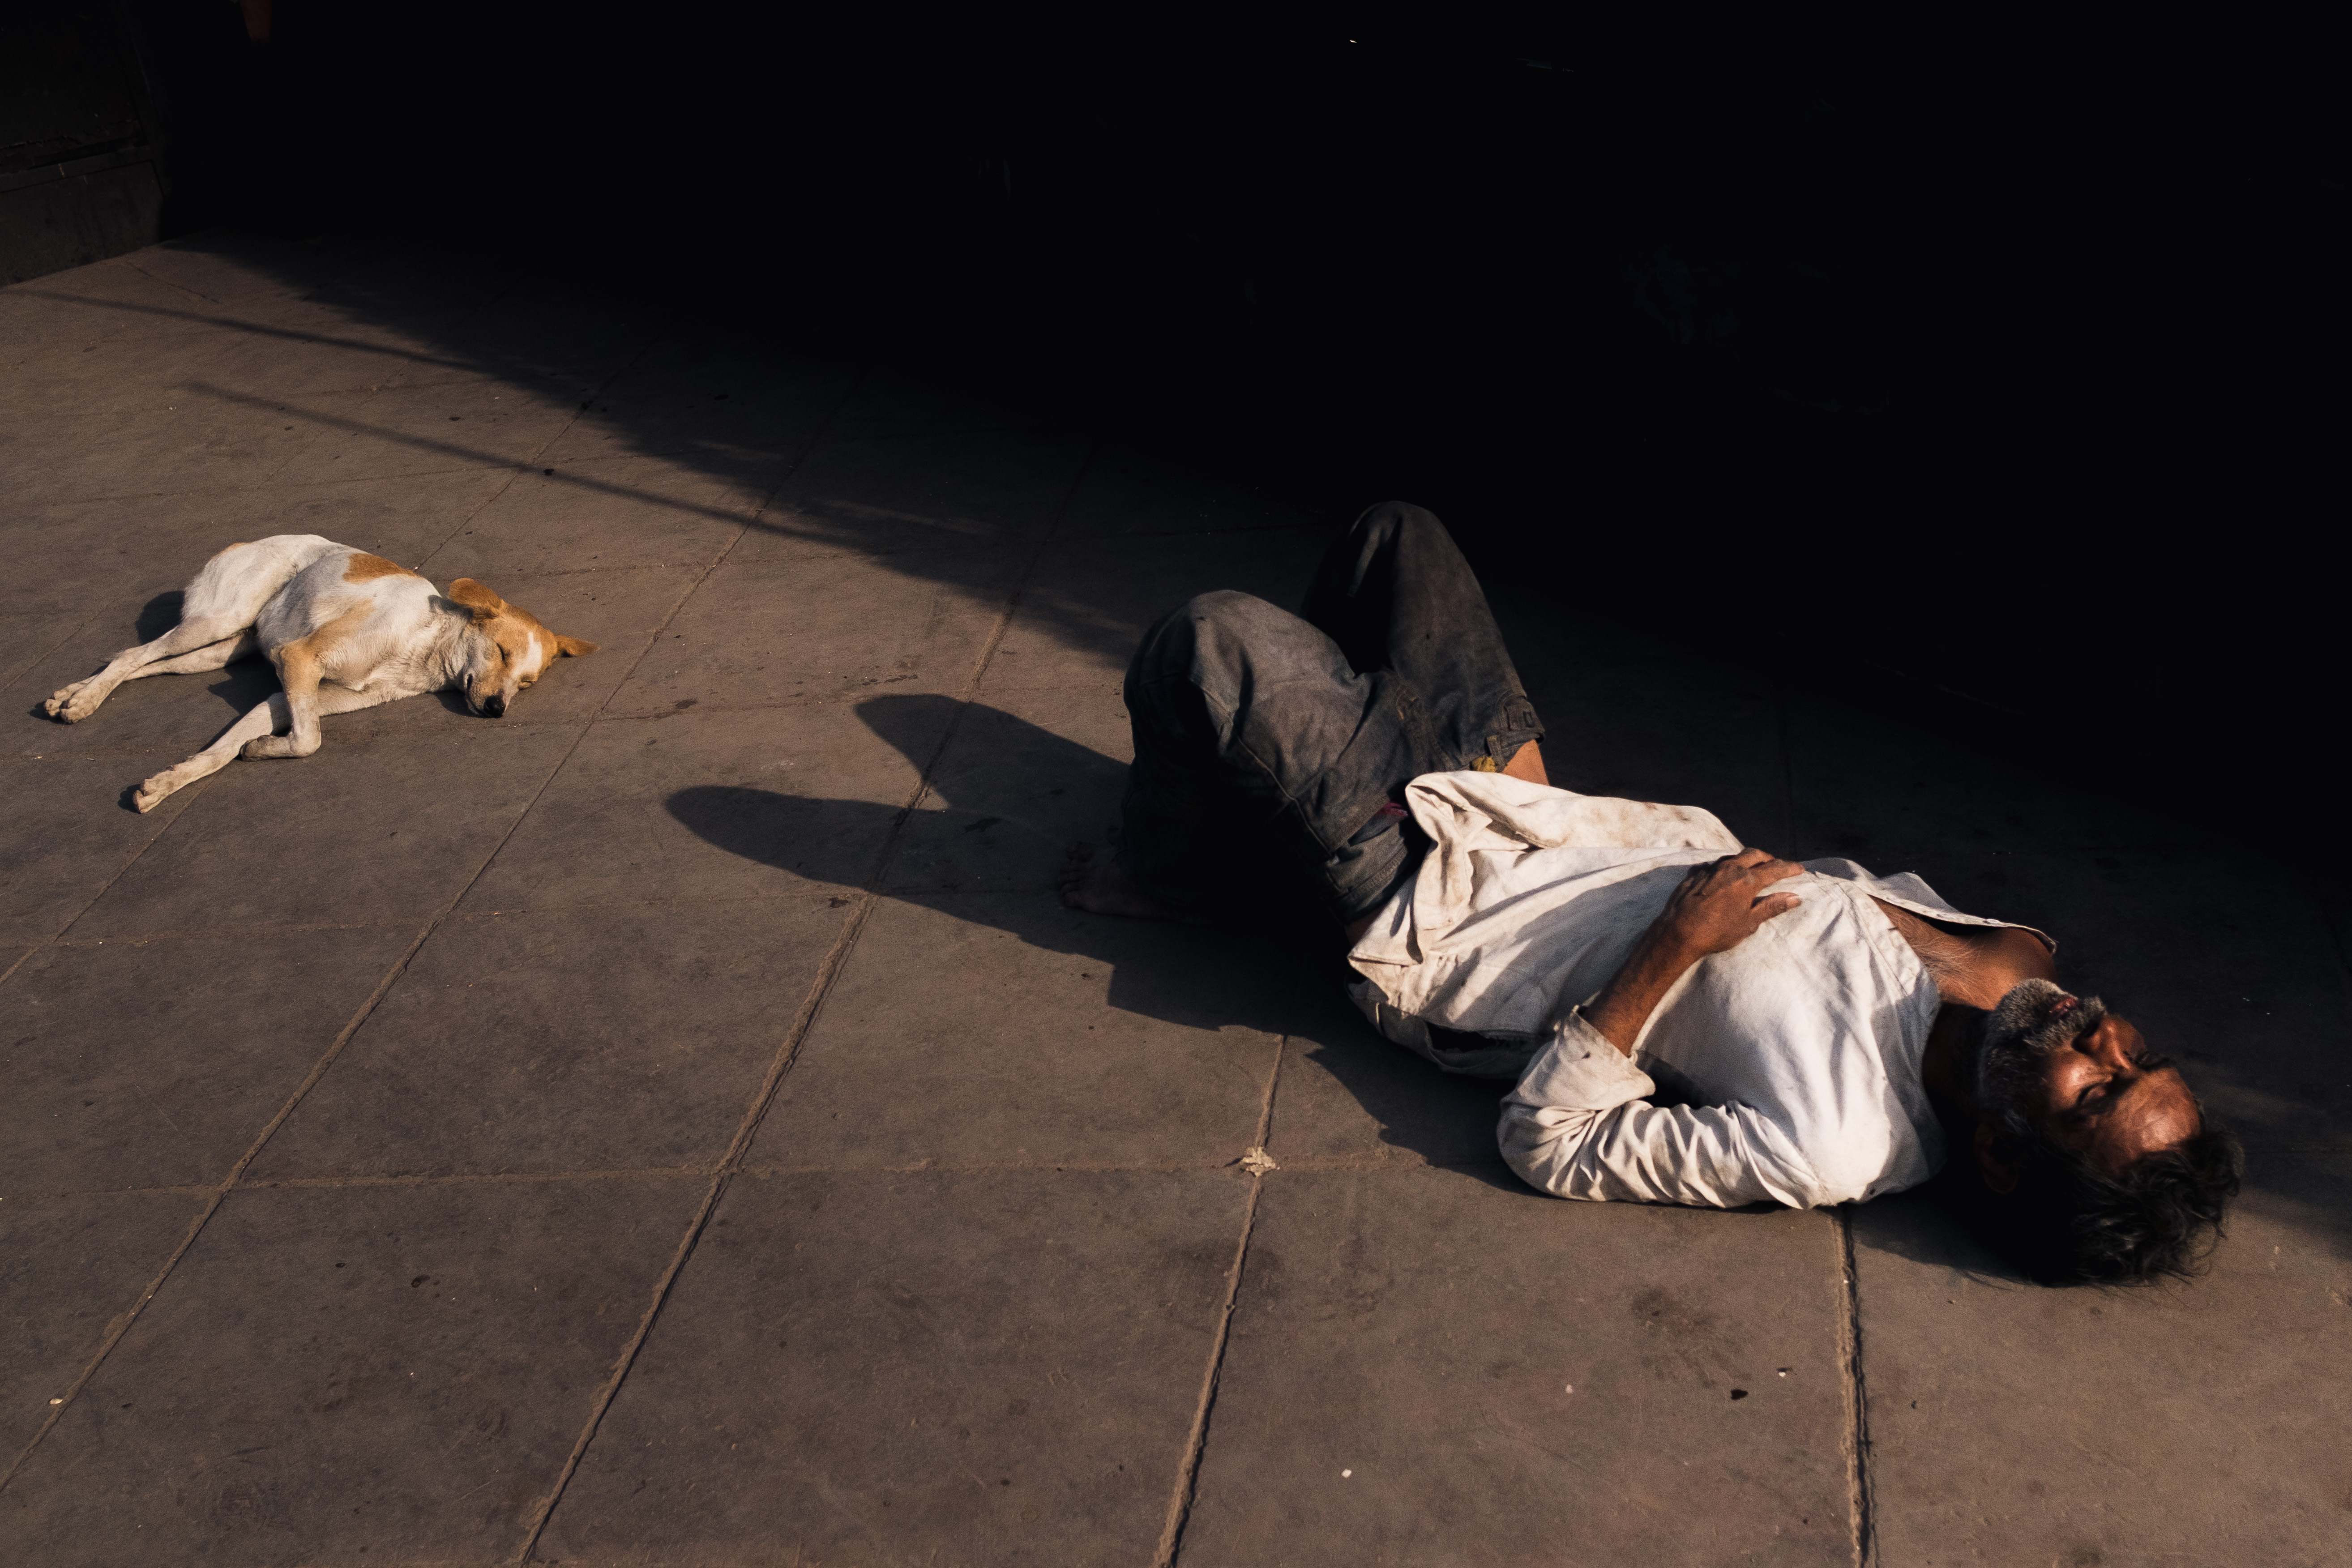 India Street Photography During Holi Festival. homeless man and stray dog sleep in the street. Images by Jason Vinson